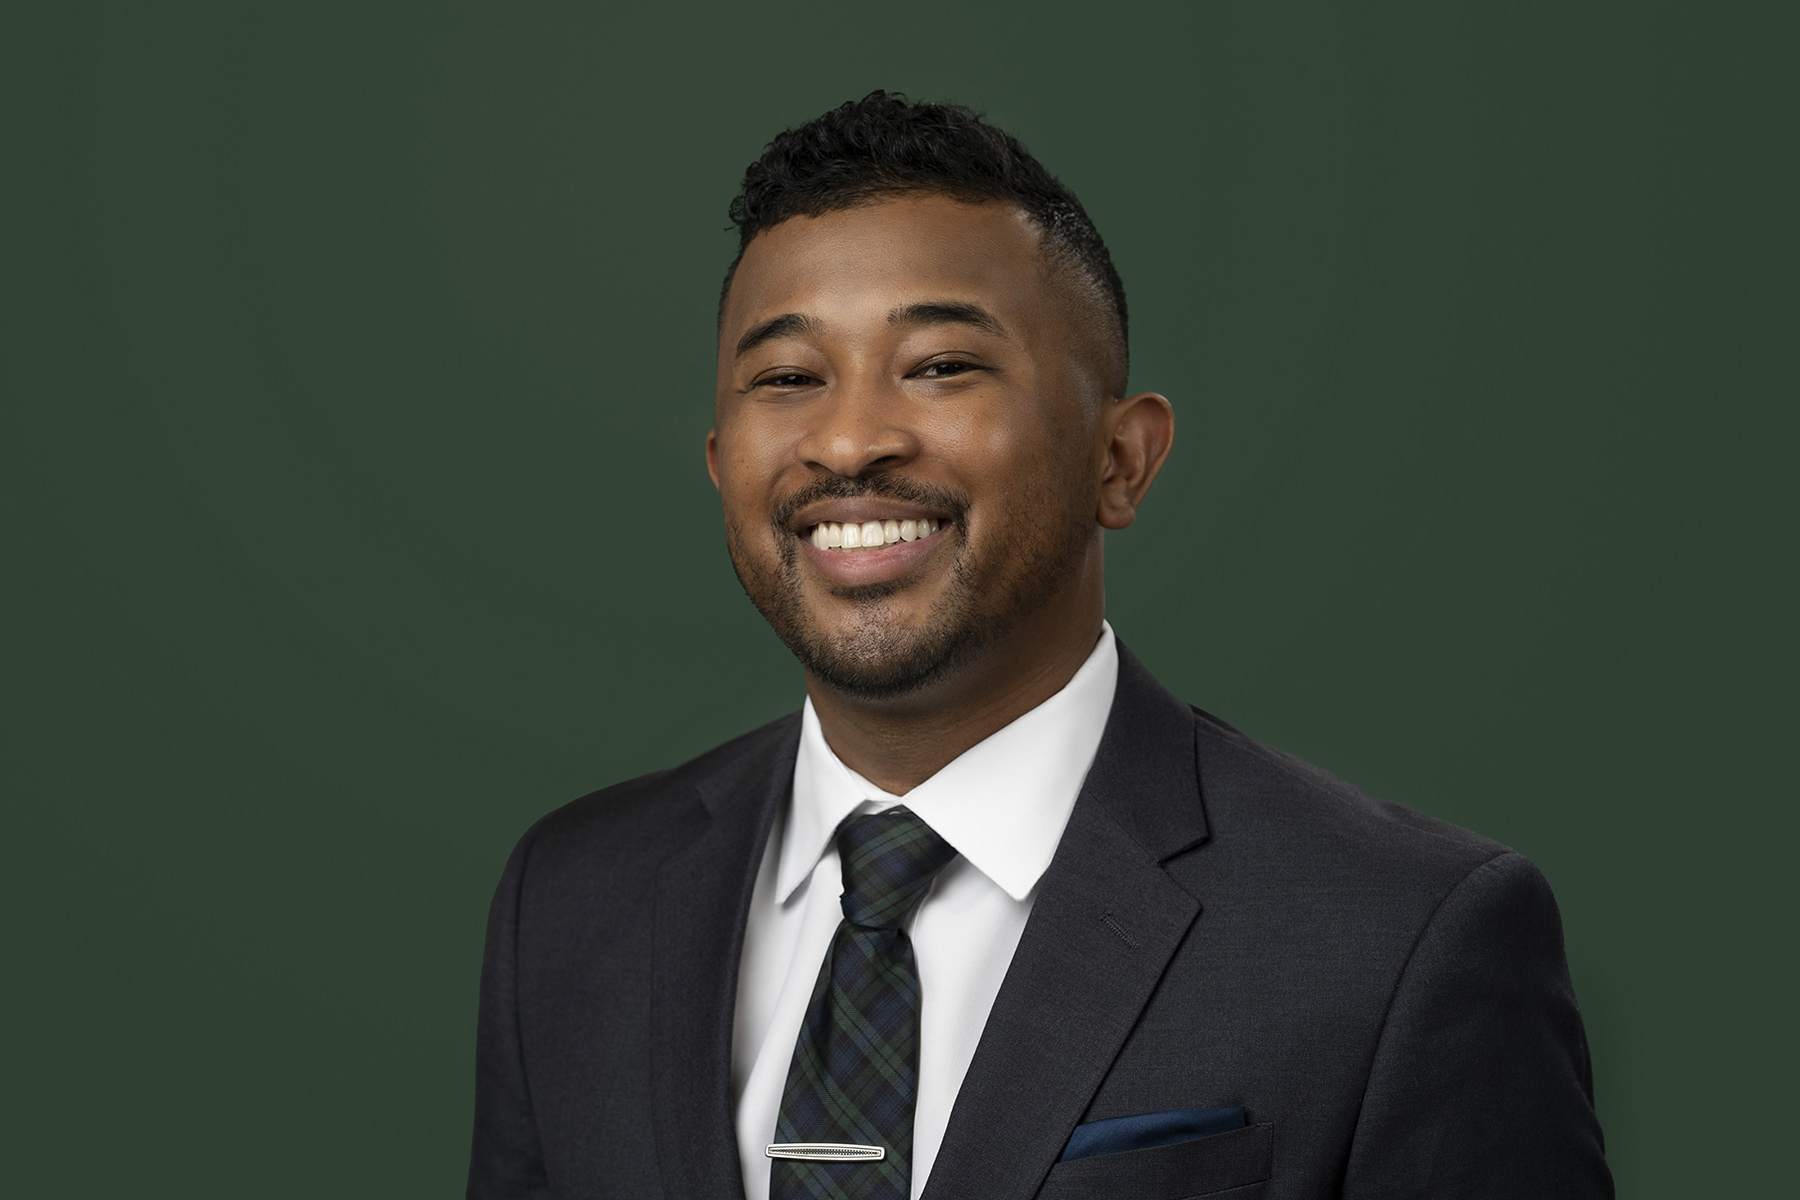 A smiling man in a suit with a tie against a green background for Denver headshots.